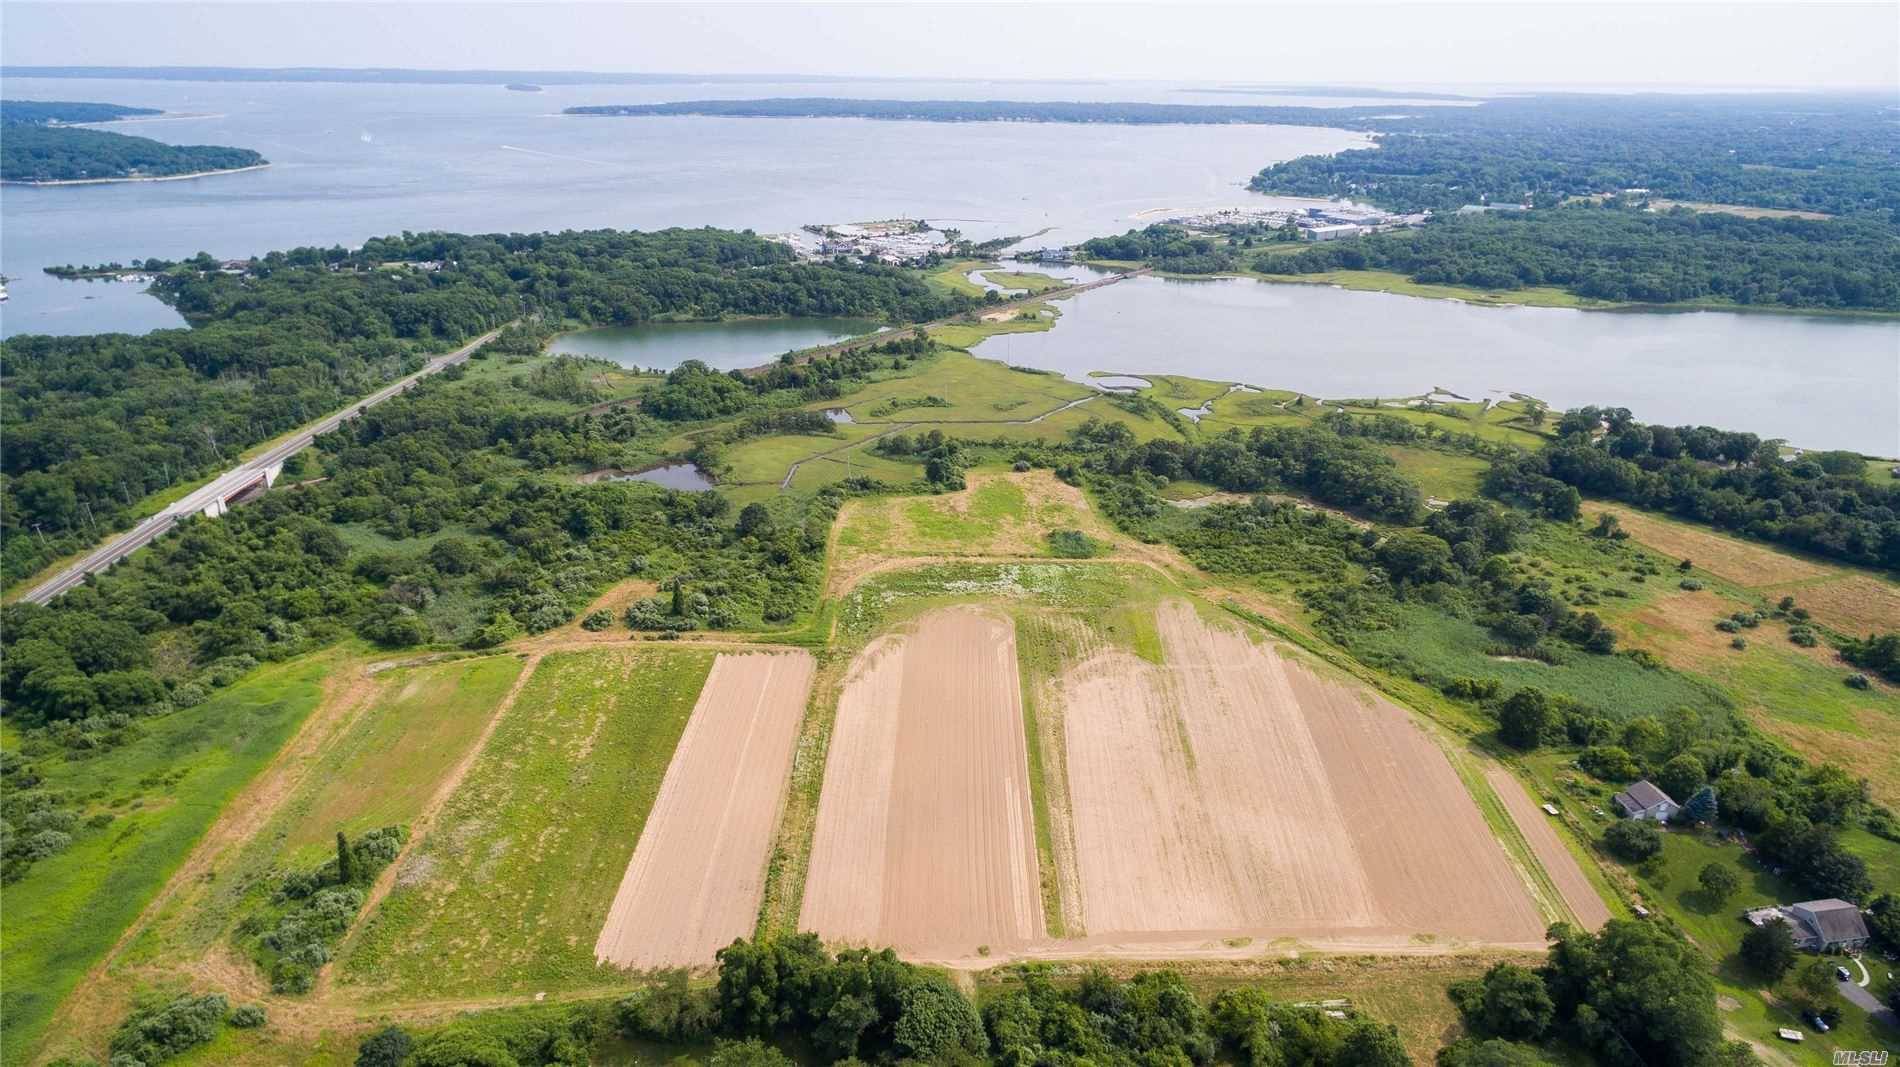 Greenport Farmland Rare opportunity to own approximately 35 acres with 33 acres development rights sold and a 1.